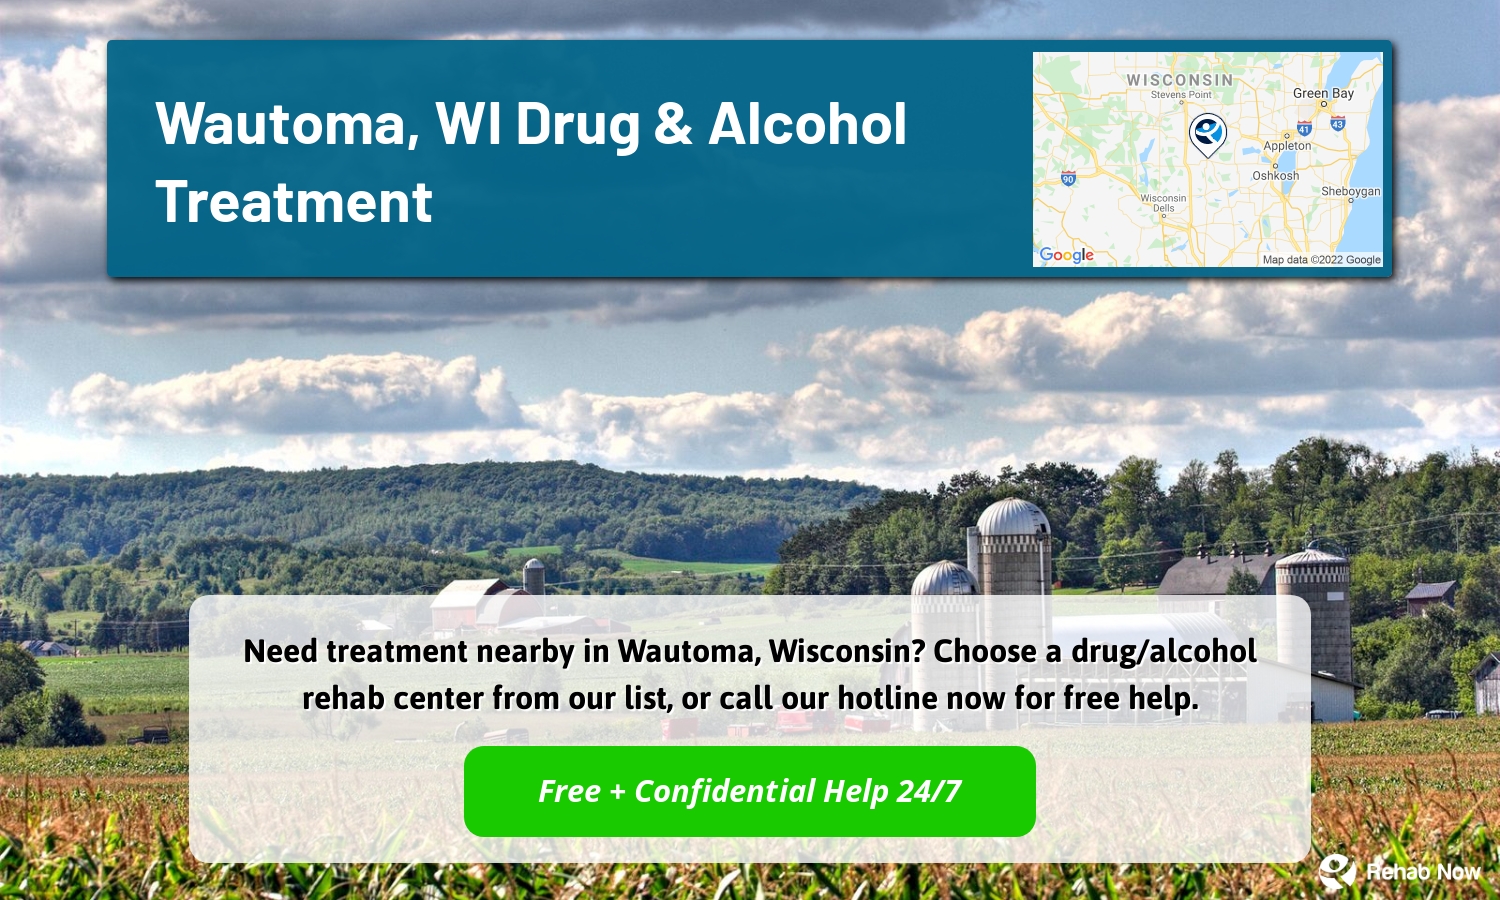 Need treatment nearby in Wautoma, Wisconsin? Choose a drug/alcohol rehab center from our list, or call our hotline now for free help.